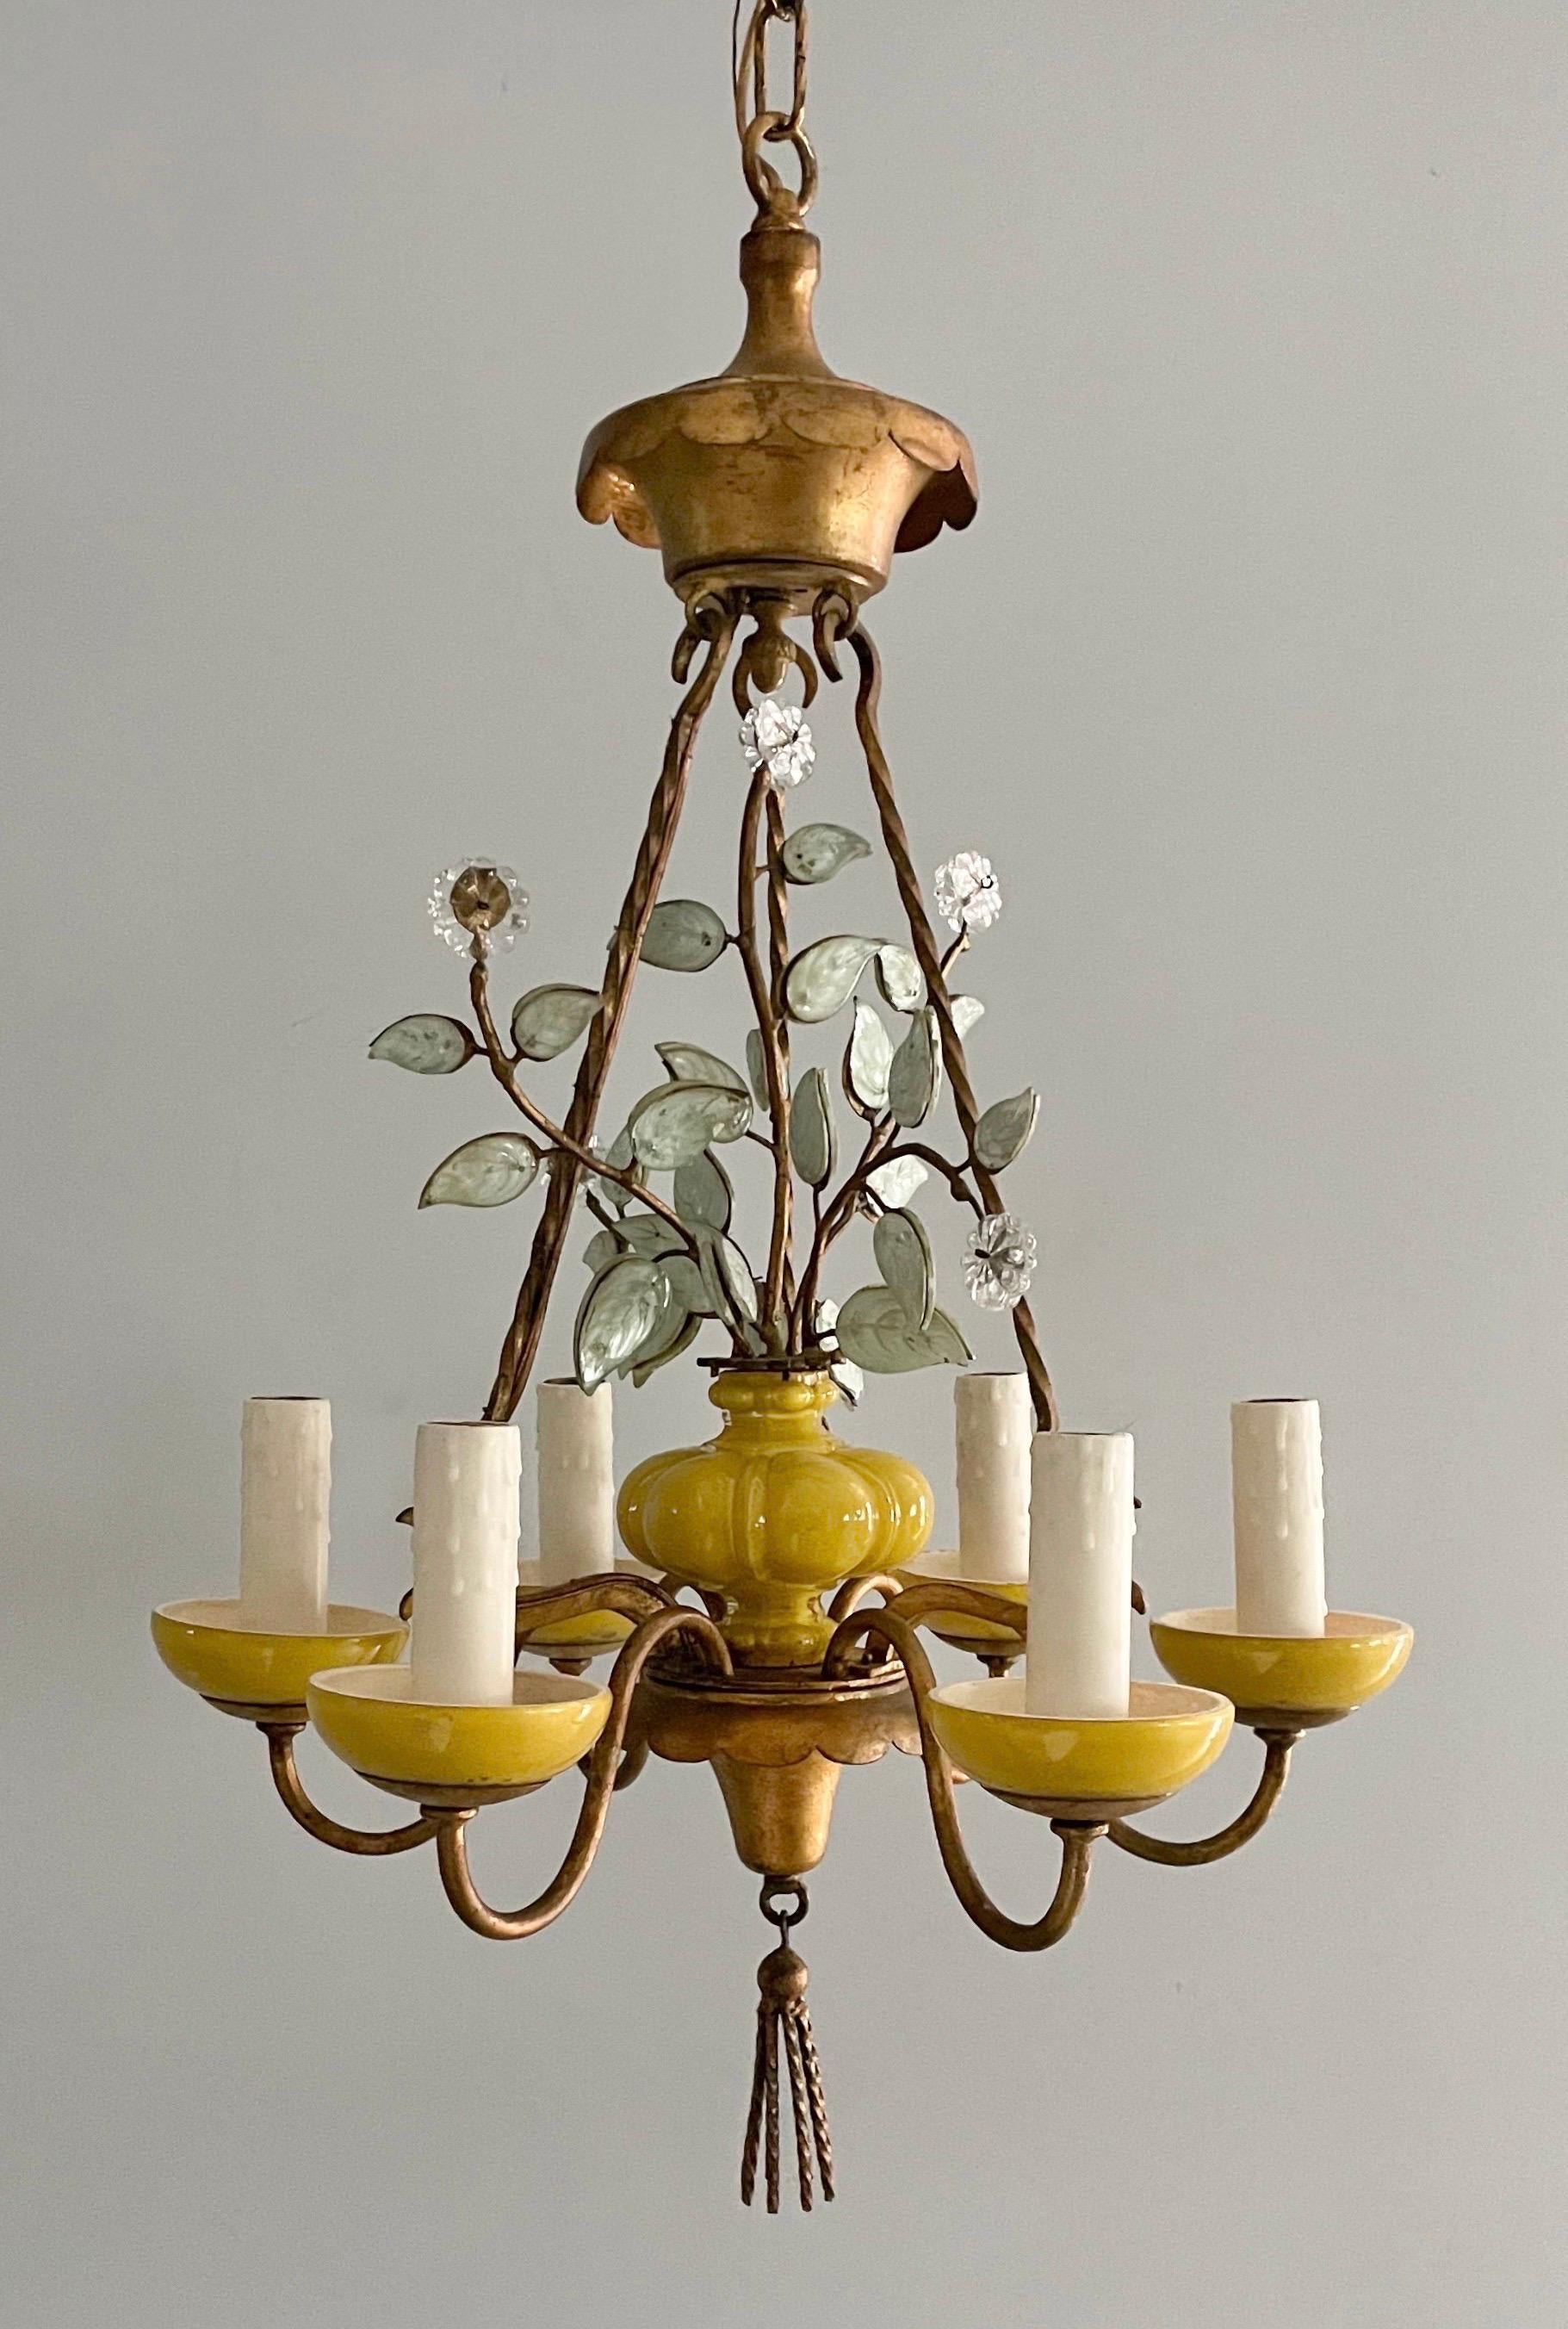 Chic, French Bagués-style chandelier by Paul Ferrante, Los Angeles, 2002.

The chandelier consists of gilded, detailed iron frame with reverse-painted glass components resembling an urn with leaves and flowers. 

The chandelier is wired and in